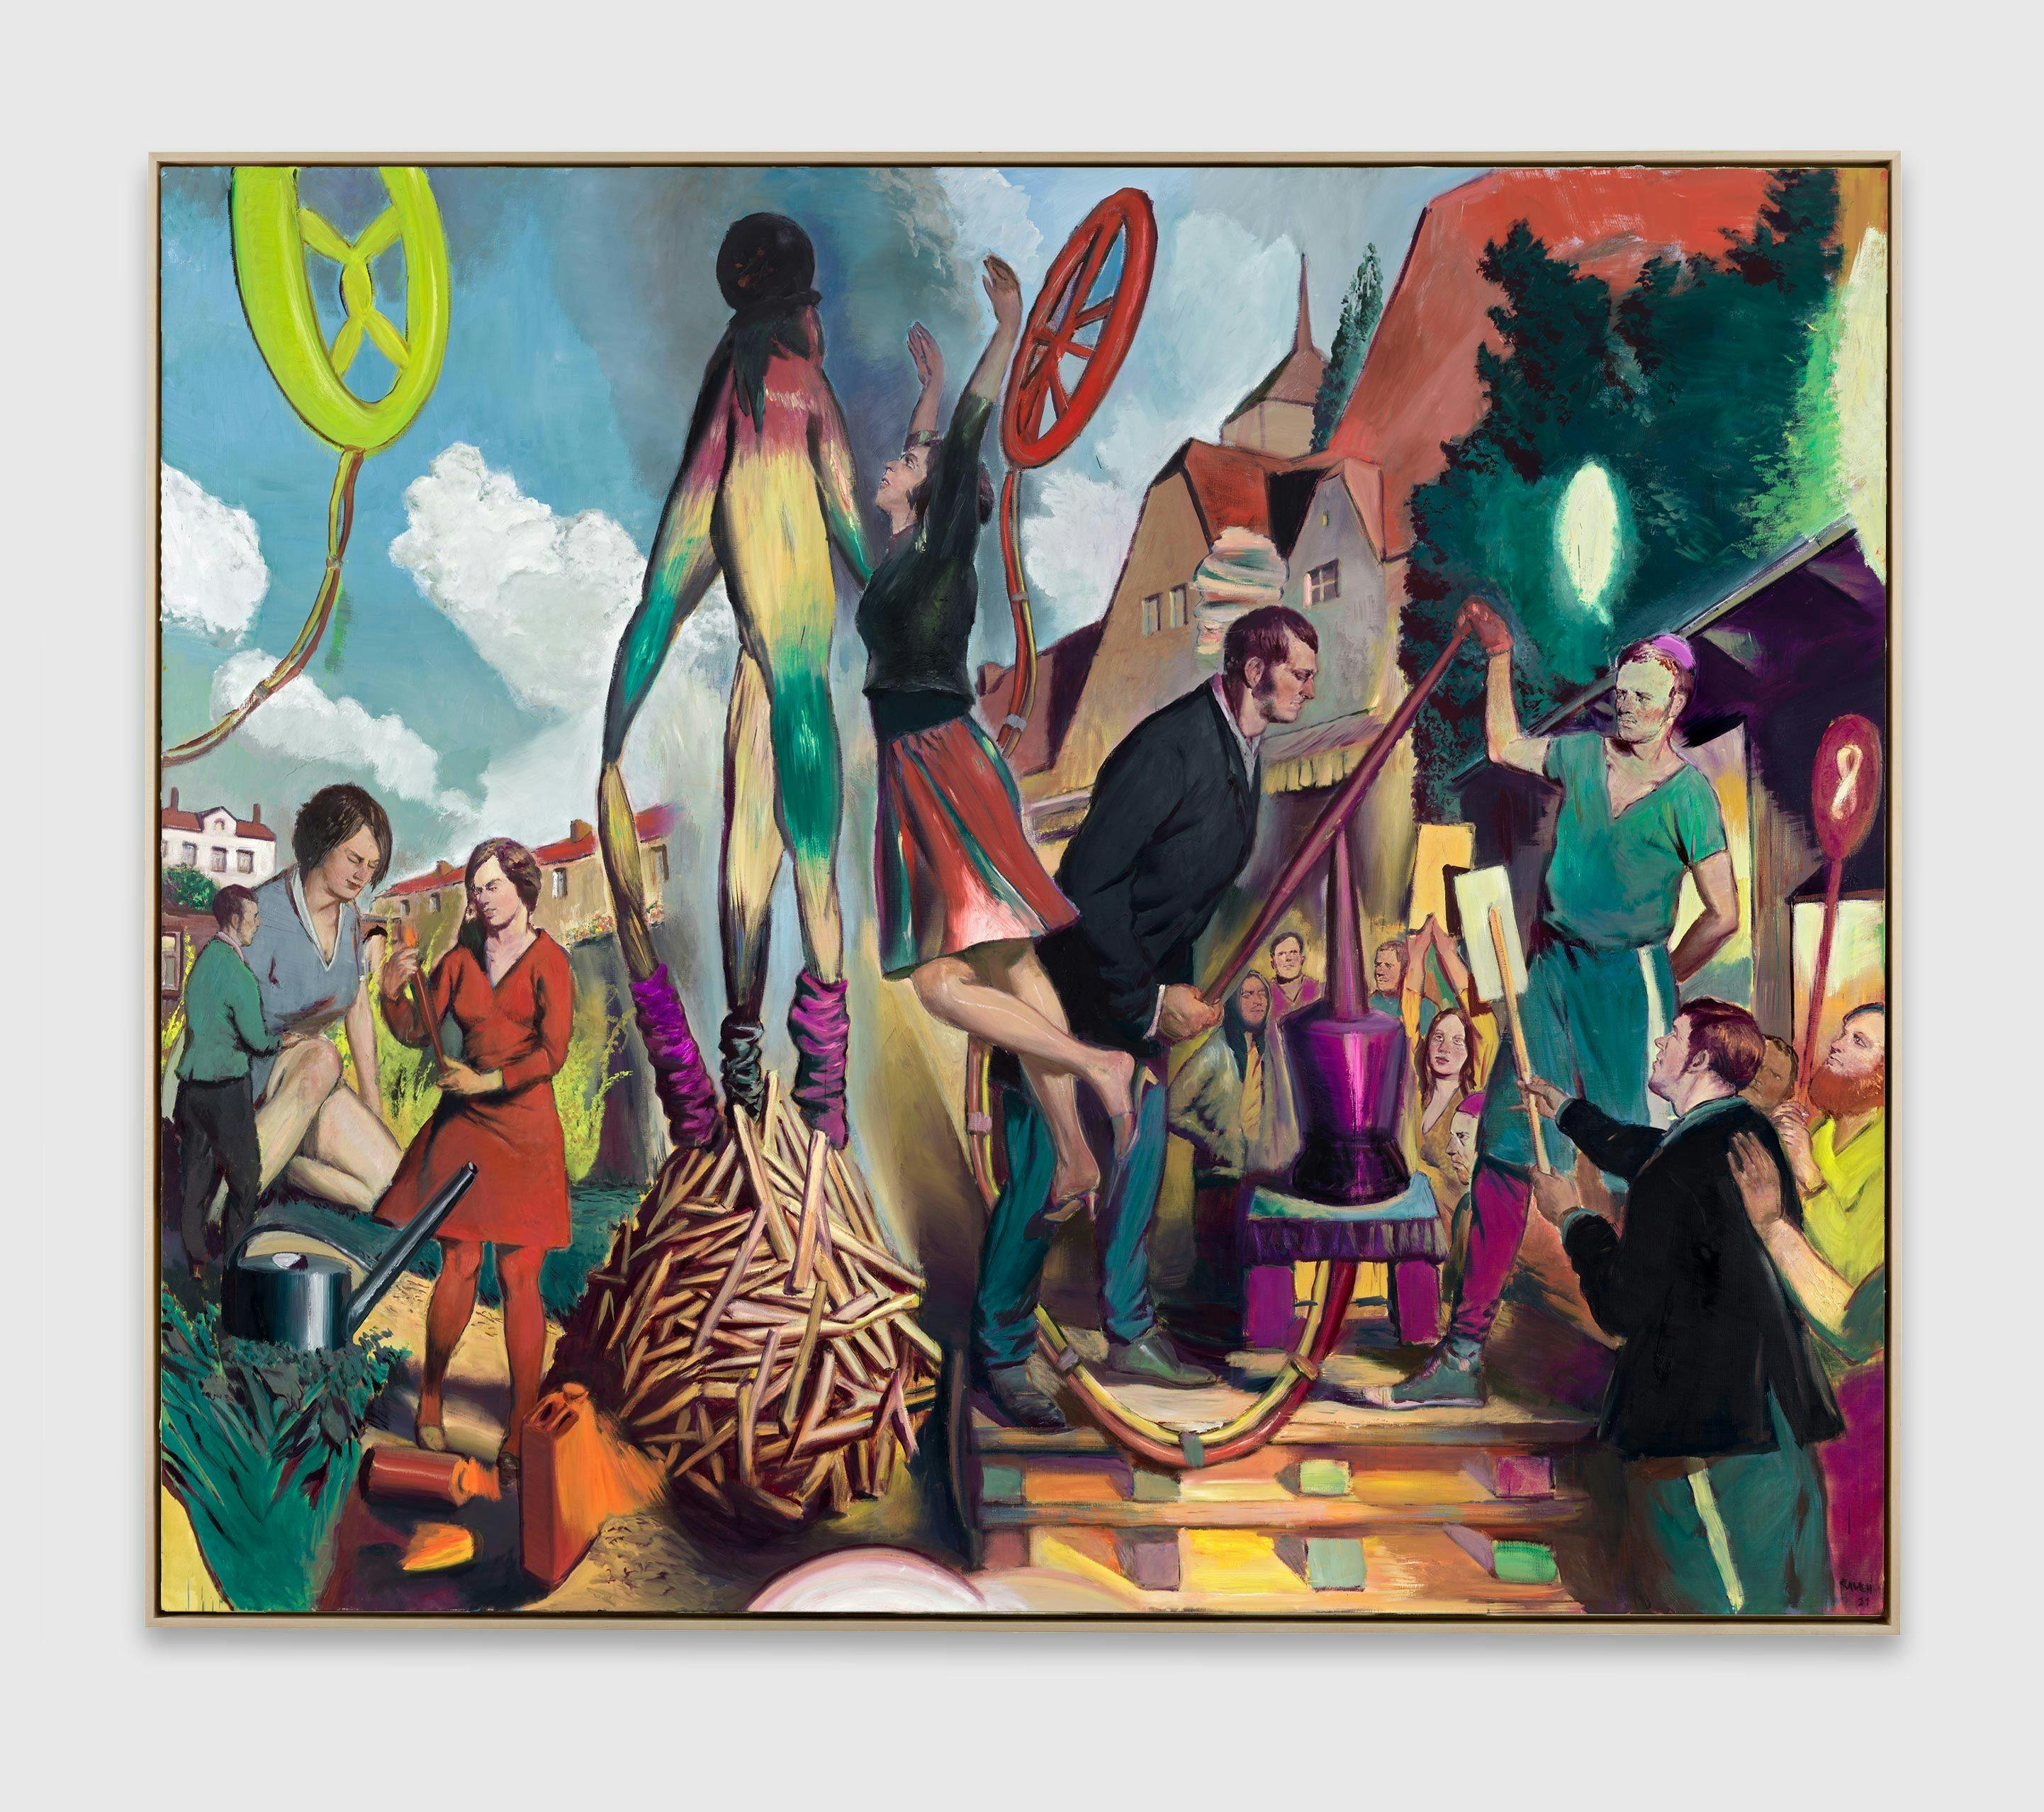 A painting by Neo Rauch, titled Die Pumpe, dated 2021.